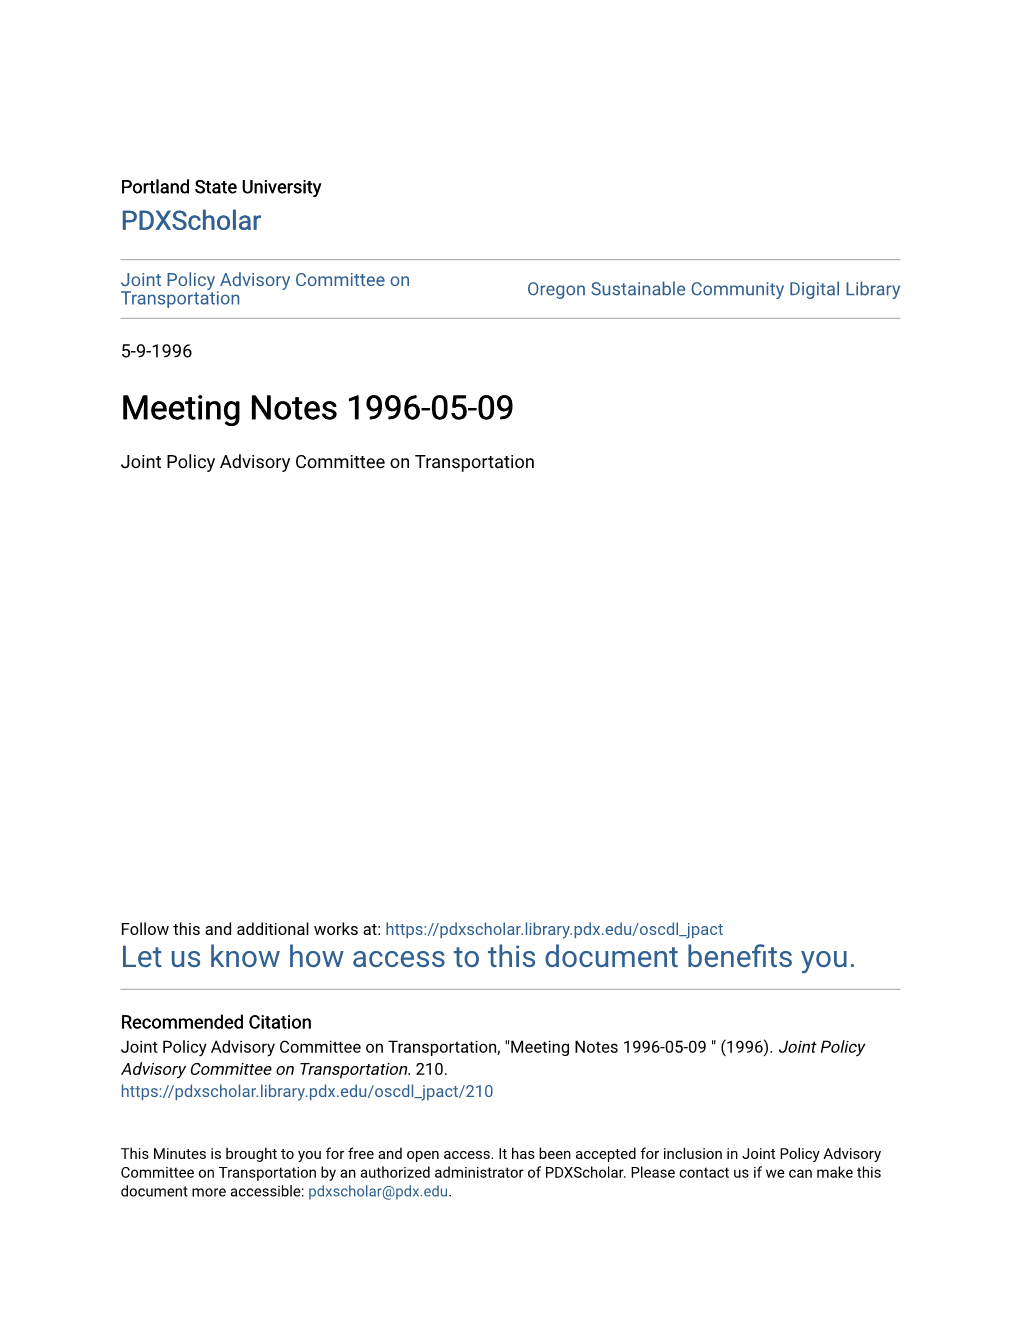 Meeting Notes 1996-05-09